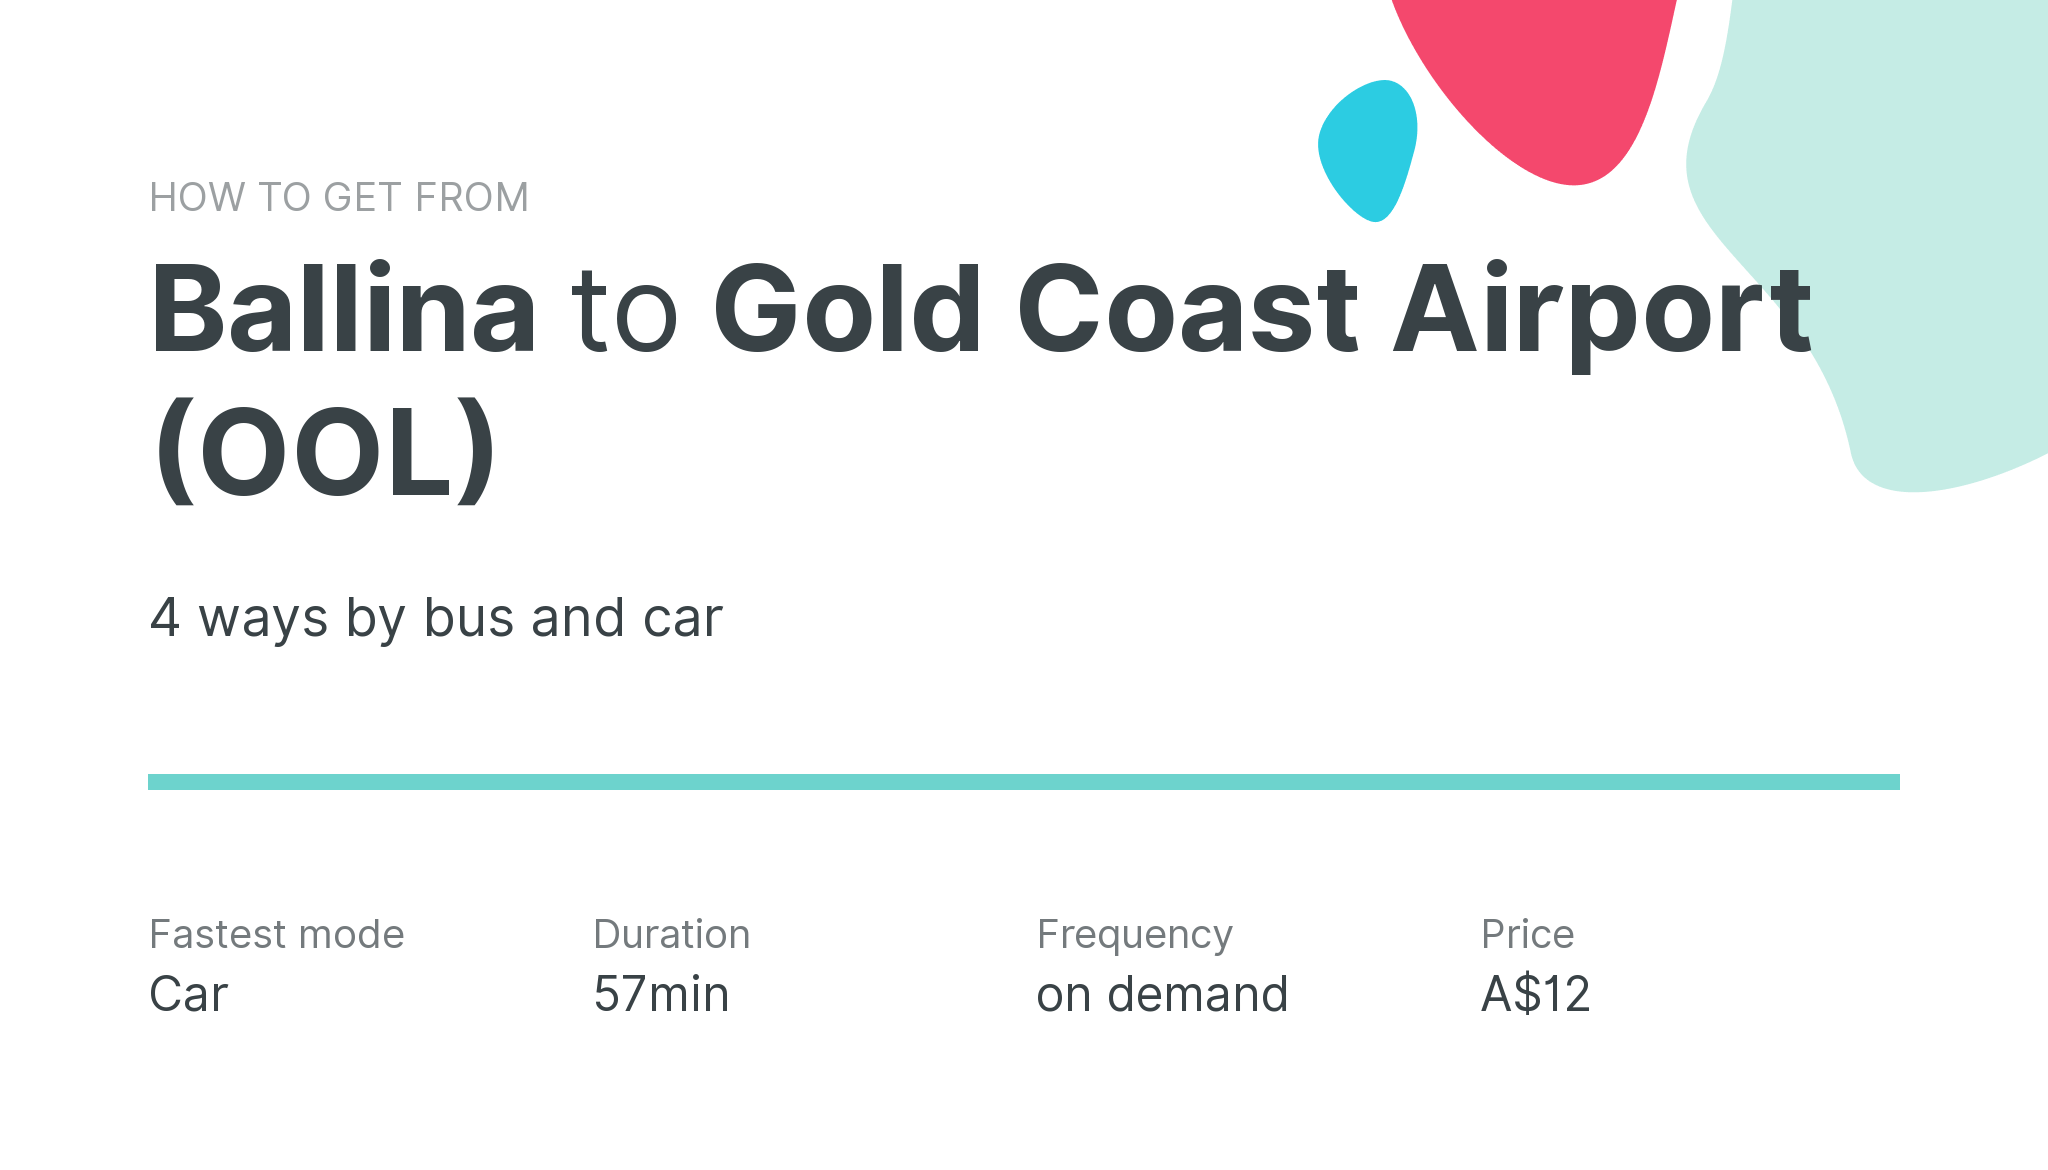 How do I get from Ballina to Gold Coast Airport (OOL)